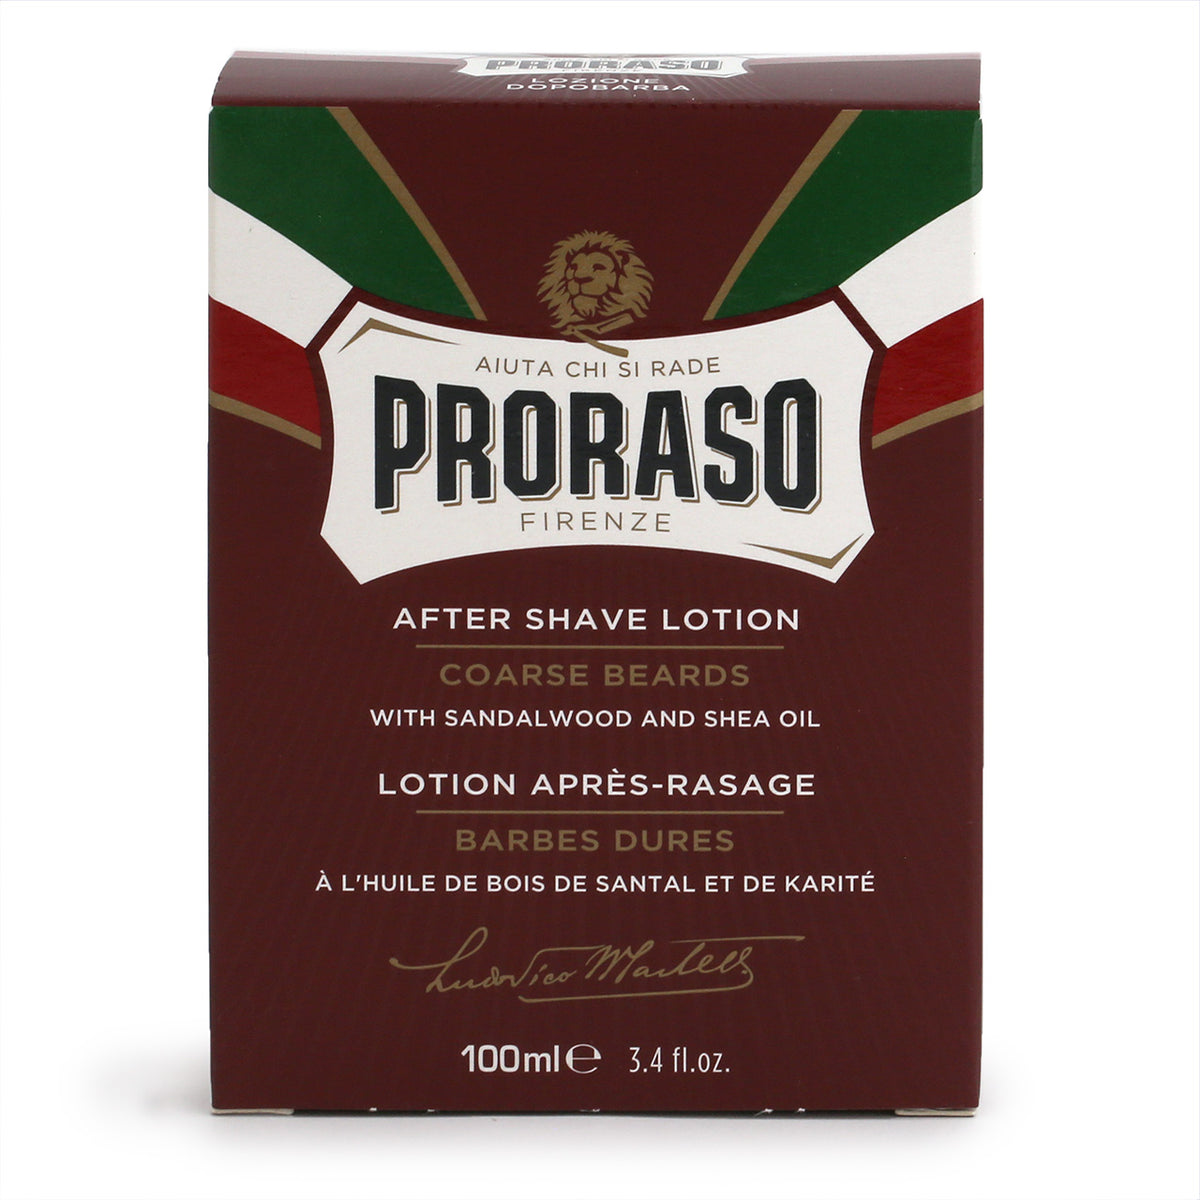 Proraso After Shave Lotion with Sandalwood and  Shea Oil for Course Beards, dark red box